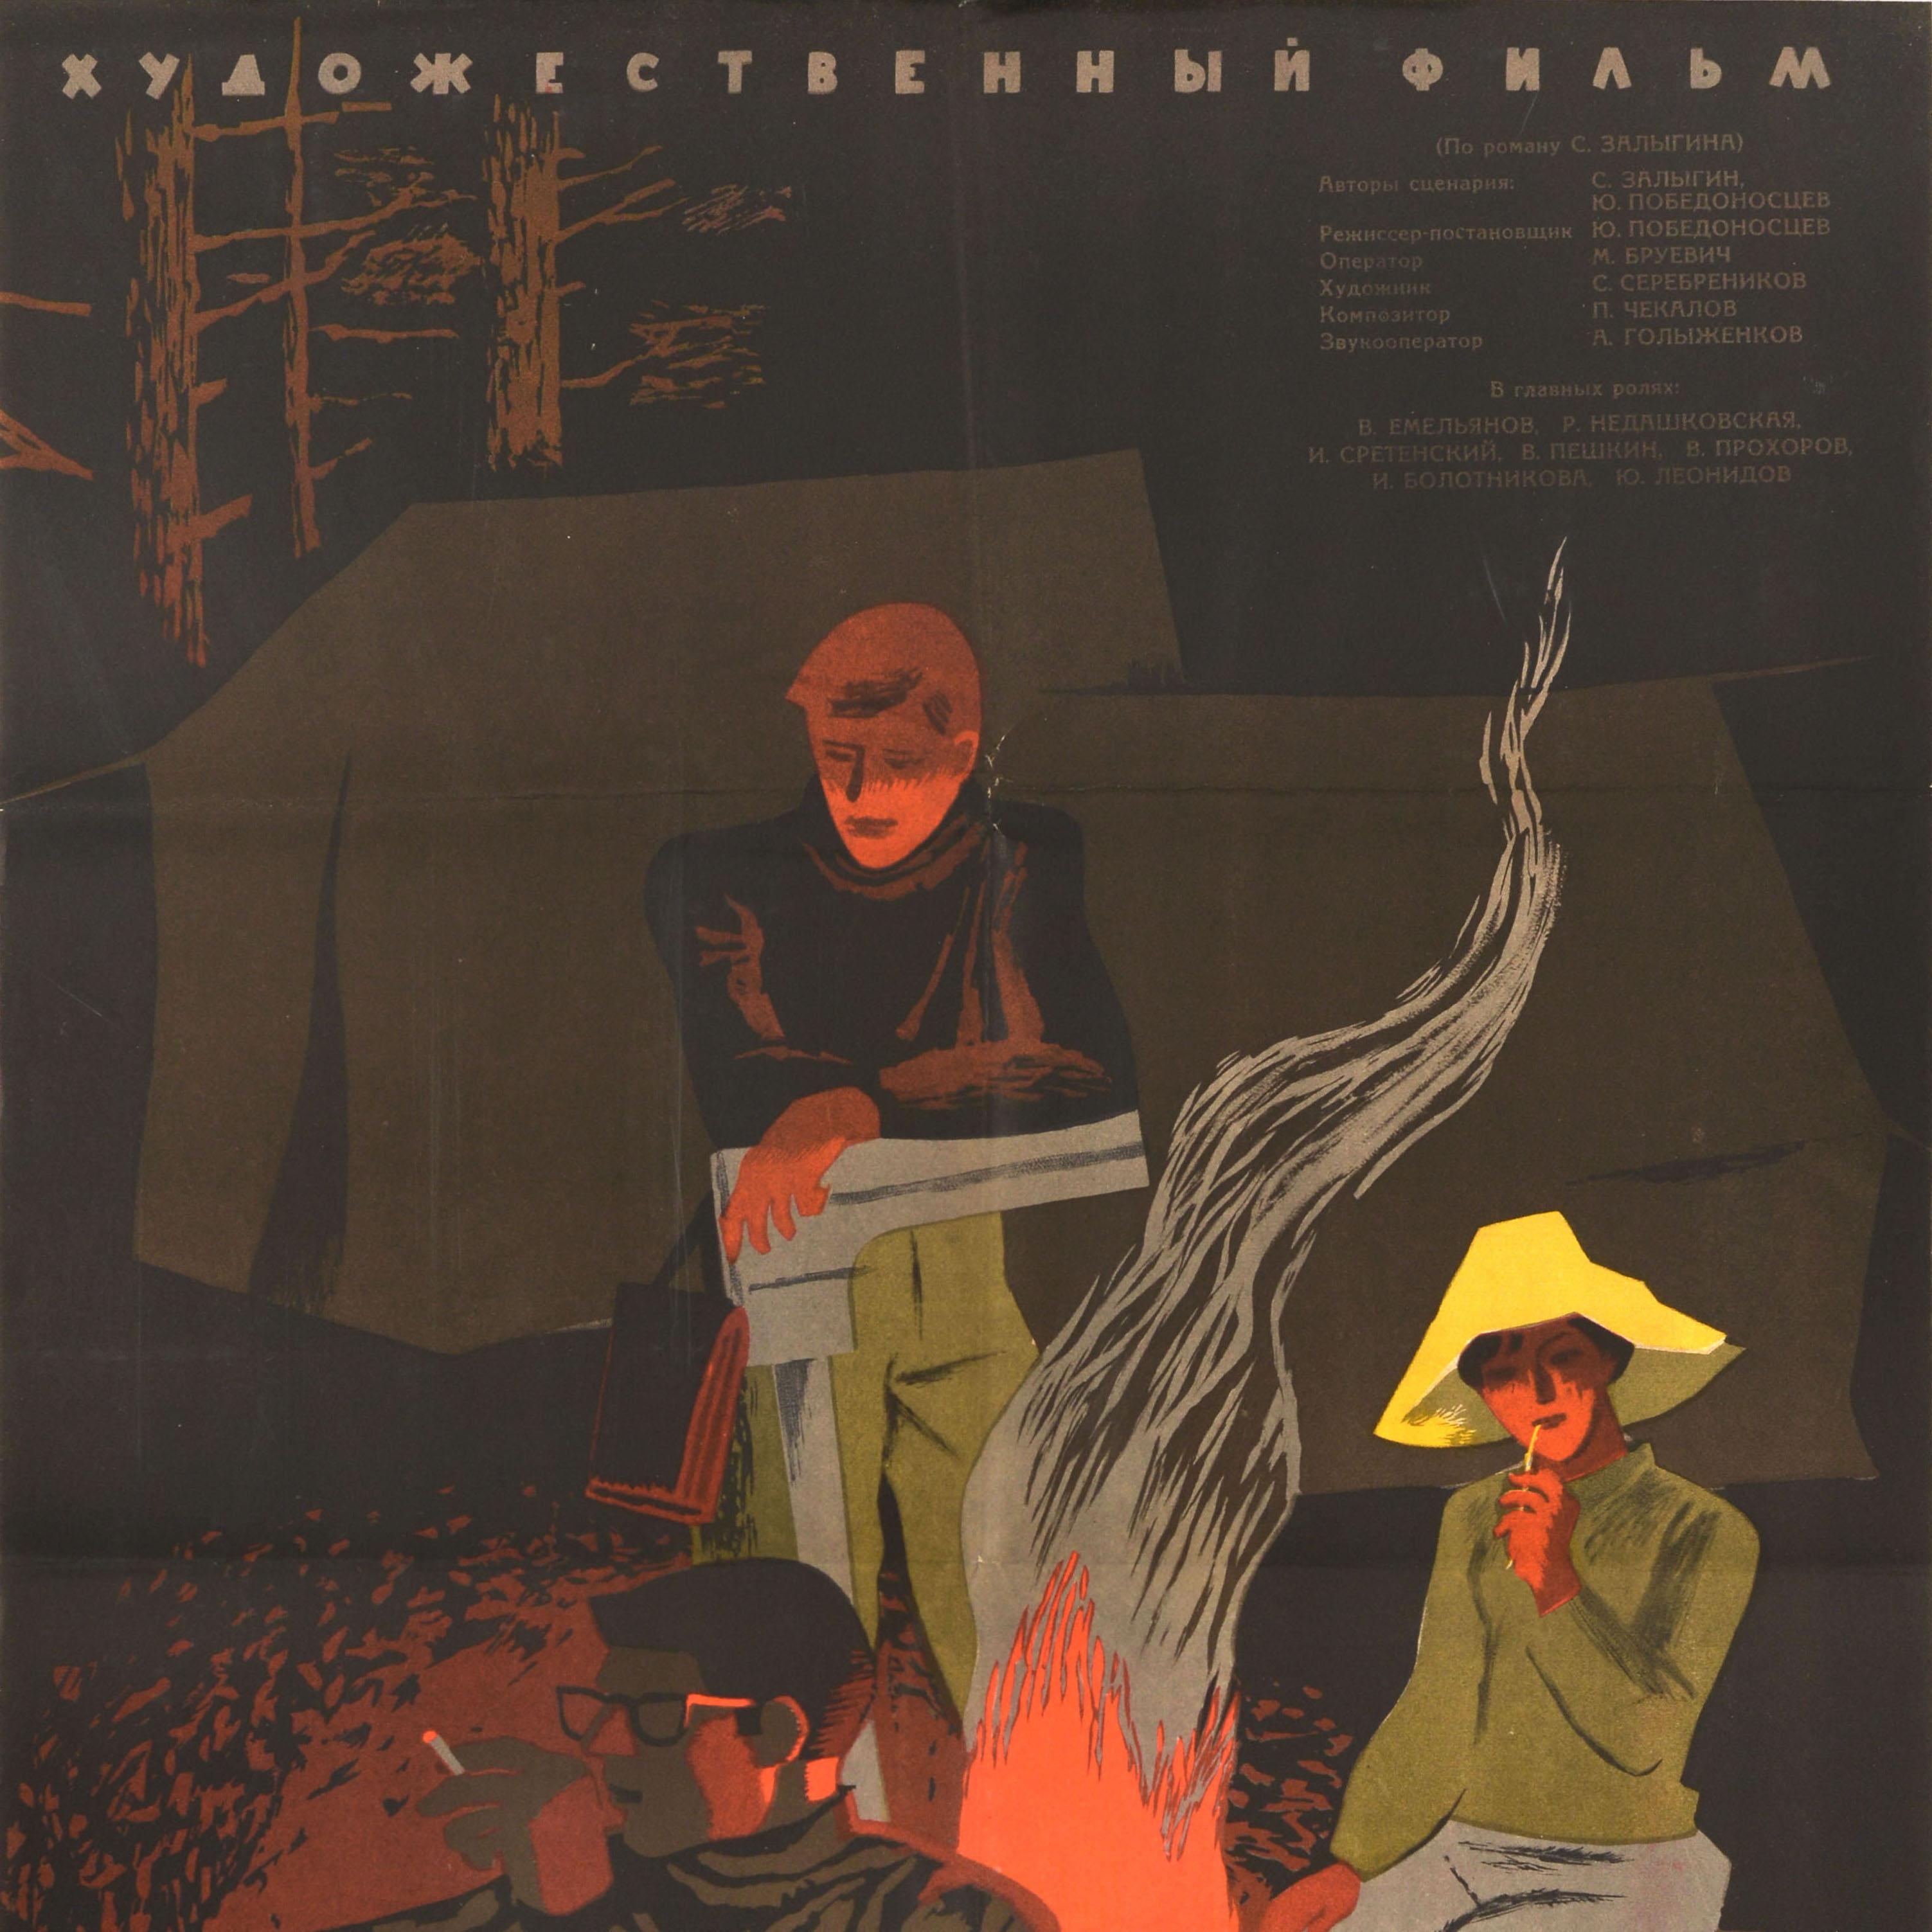 Original Vintage Movie Poster Trails Of Altai Scientific Expedition Camping USSR - Black Print by Unknown